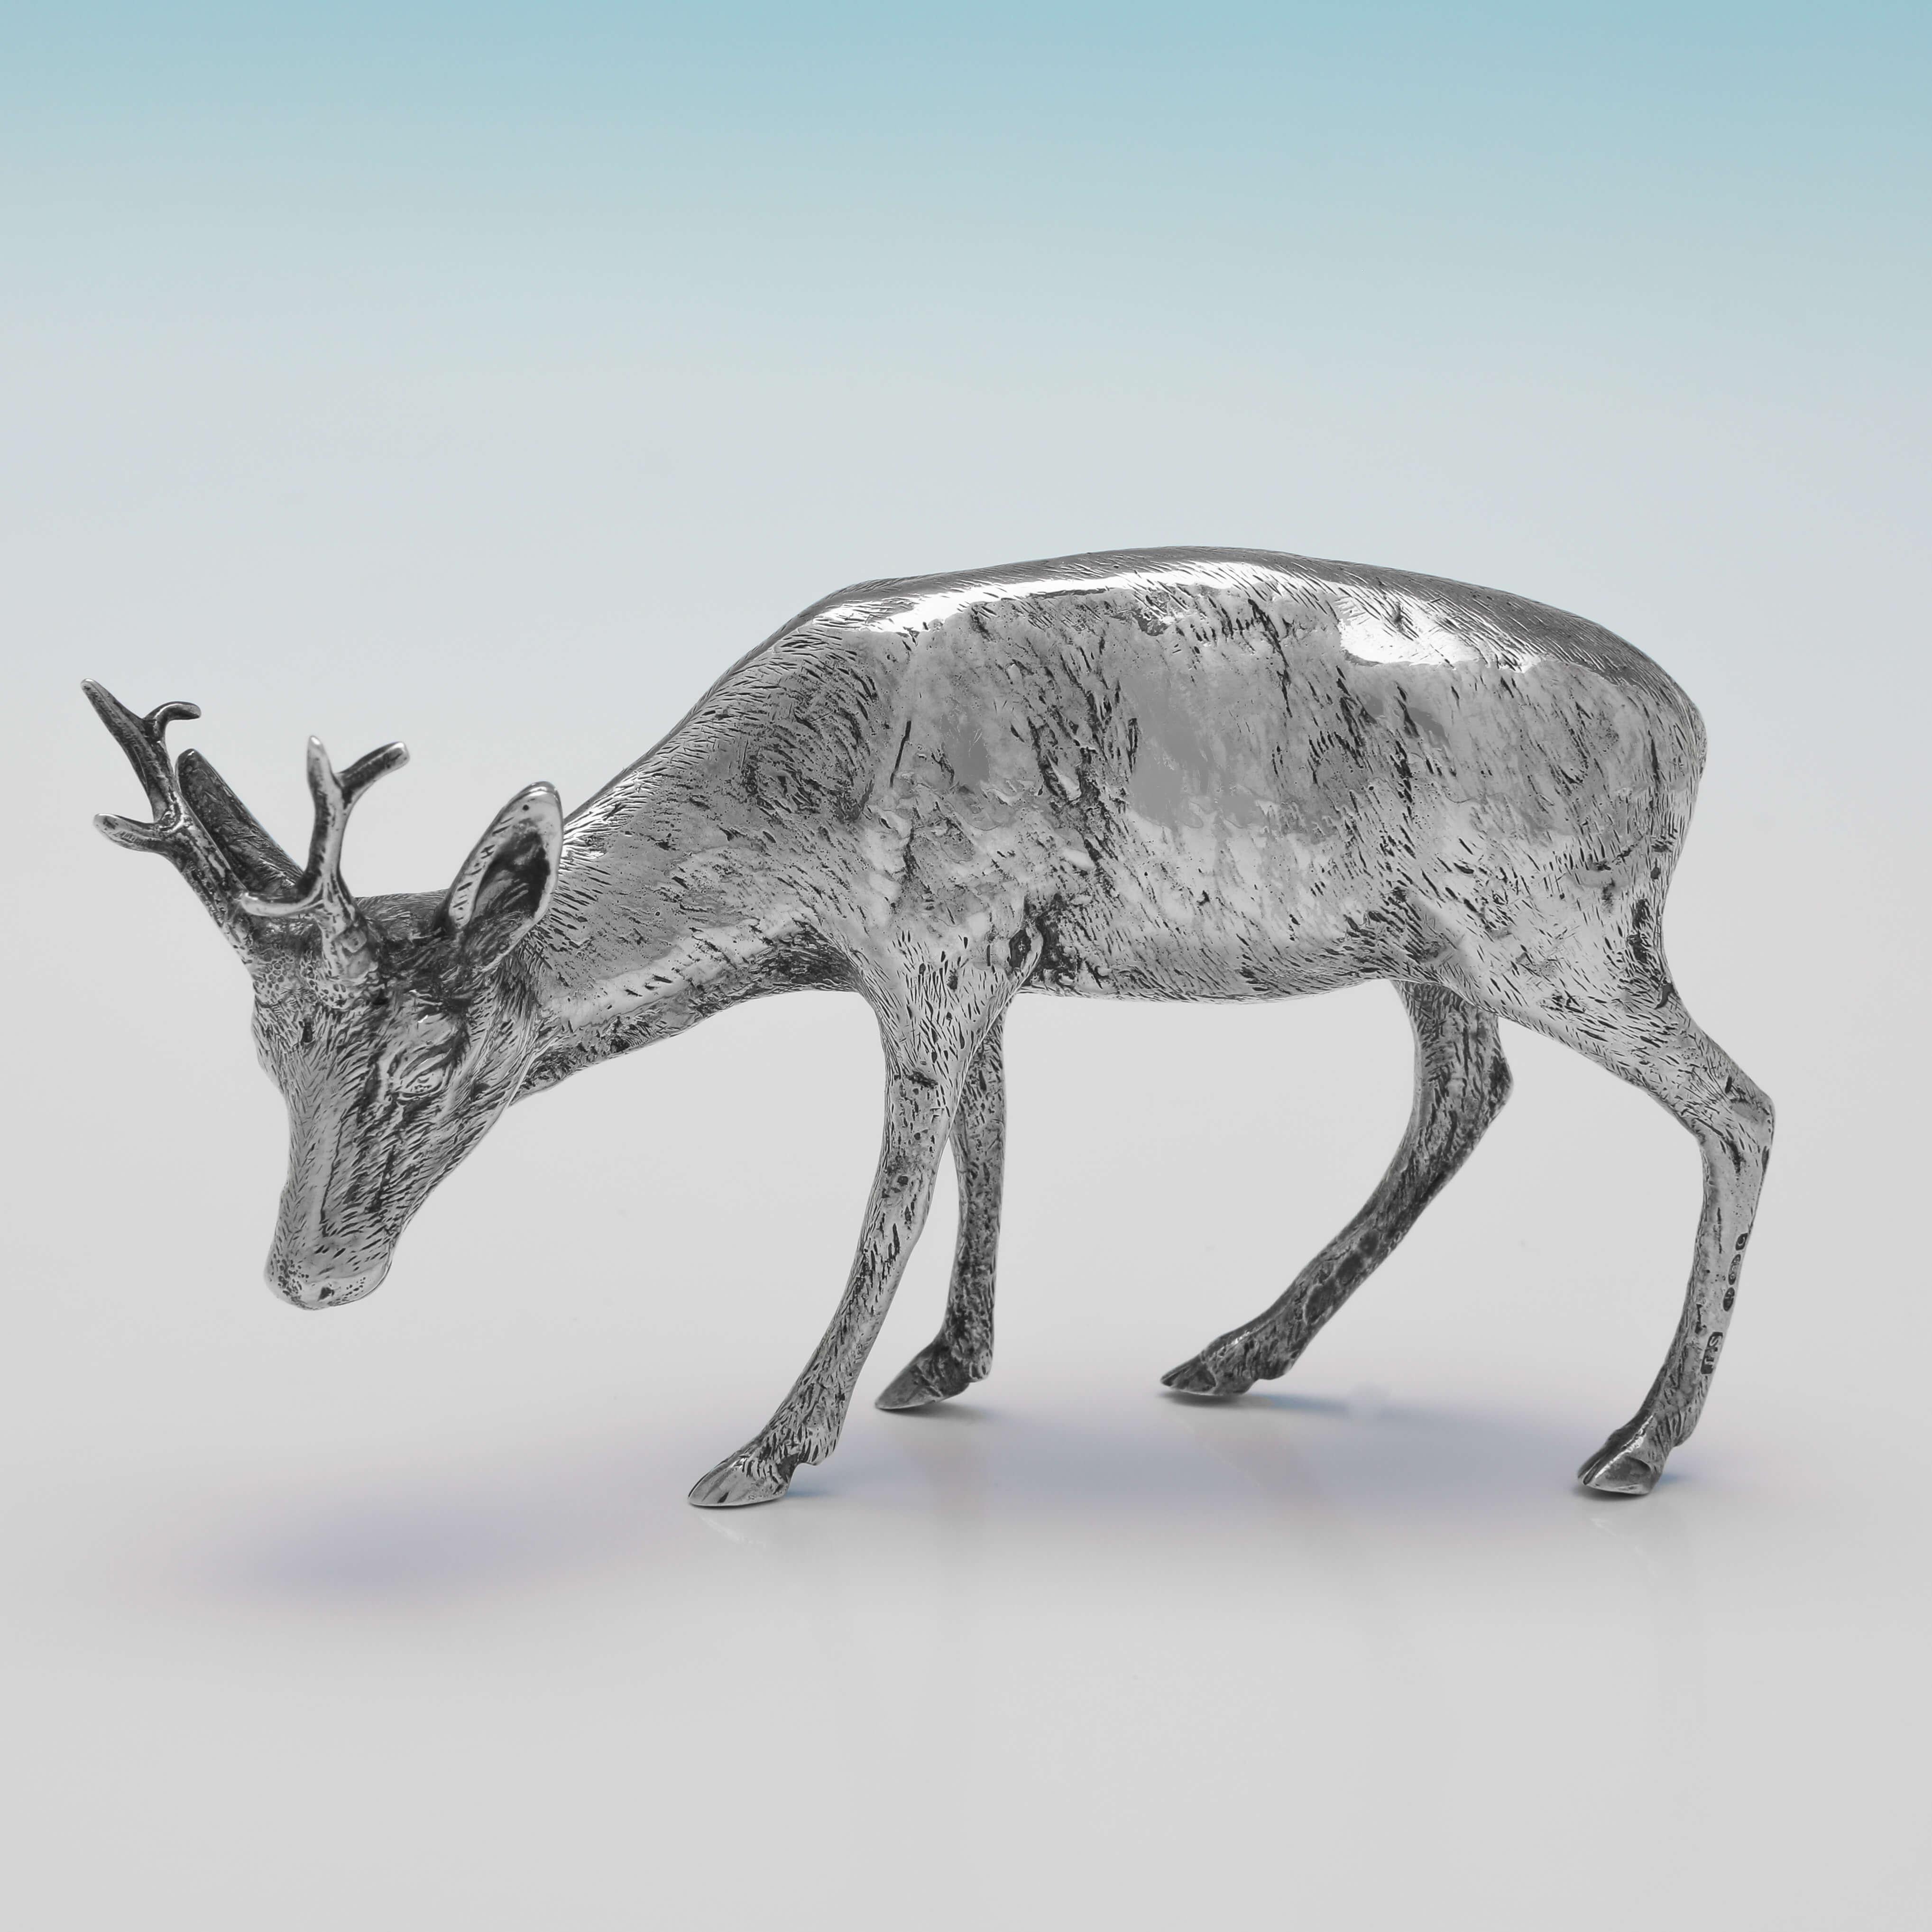 Import marked for London in 1938 by Israel Segalov, this handsome Sterling Silver Model of a Stag & Doe, are realistically cast. Each model measures 3